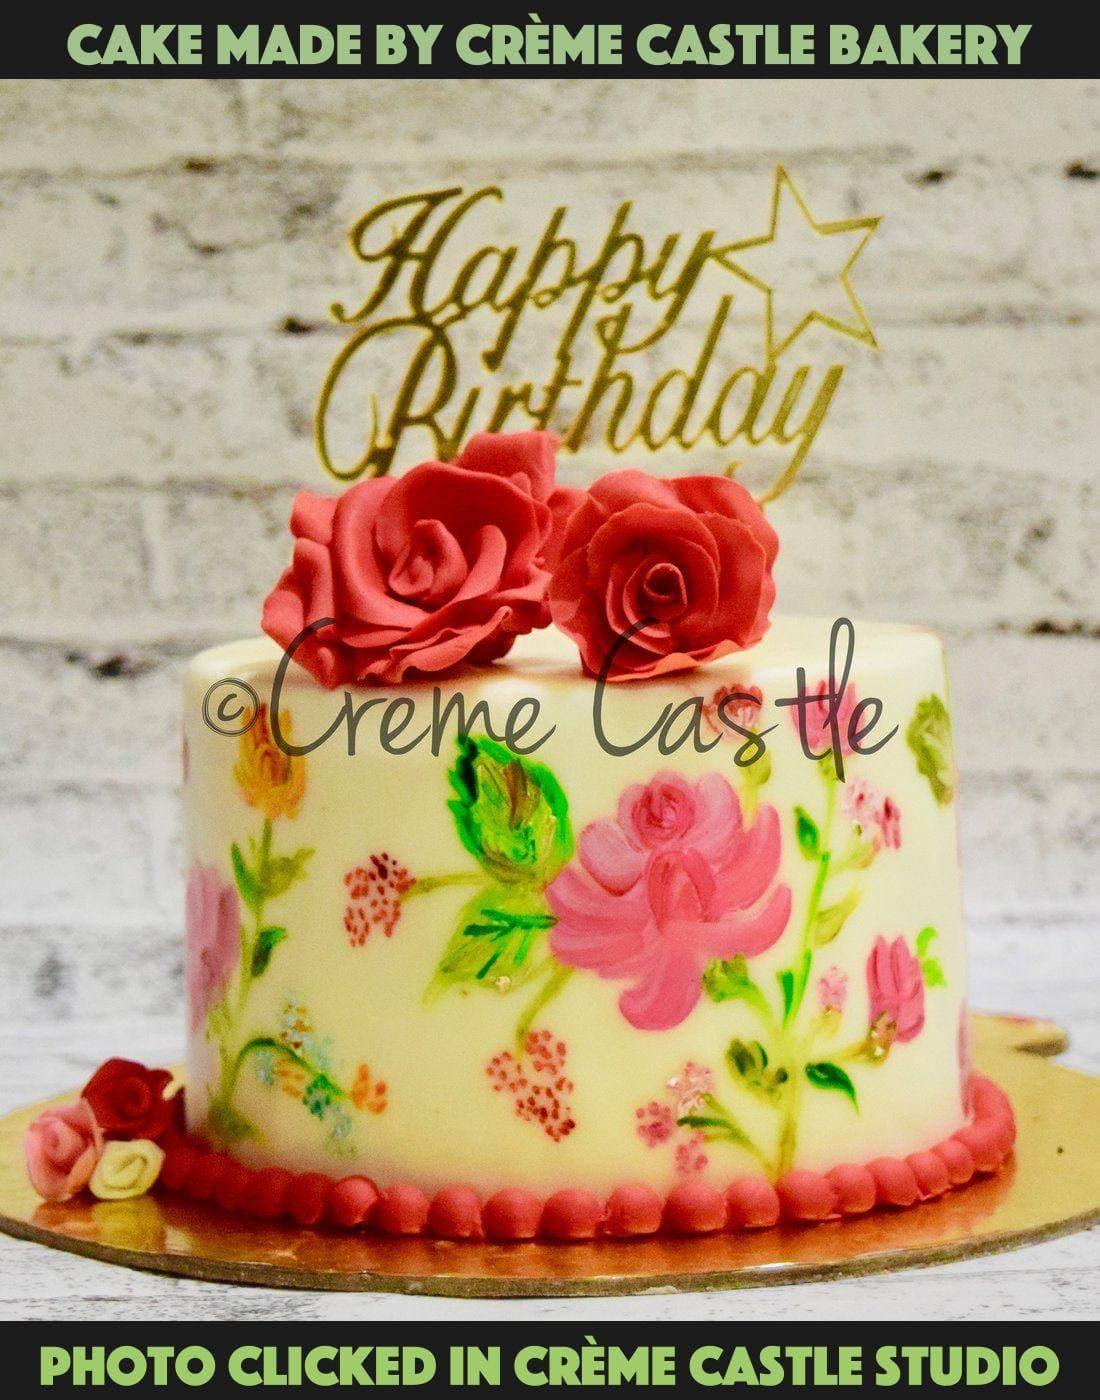 6″ Red Velvet floral design birthday cake with fresh roses, macarons and  hints of edible 24k gold leaf – Yaa's Baked Goods Galore